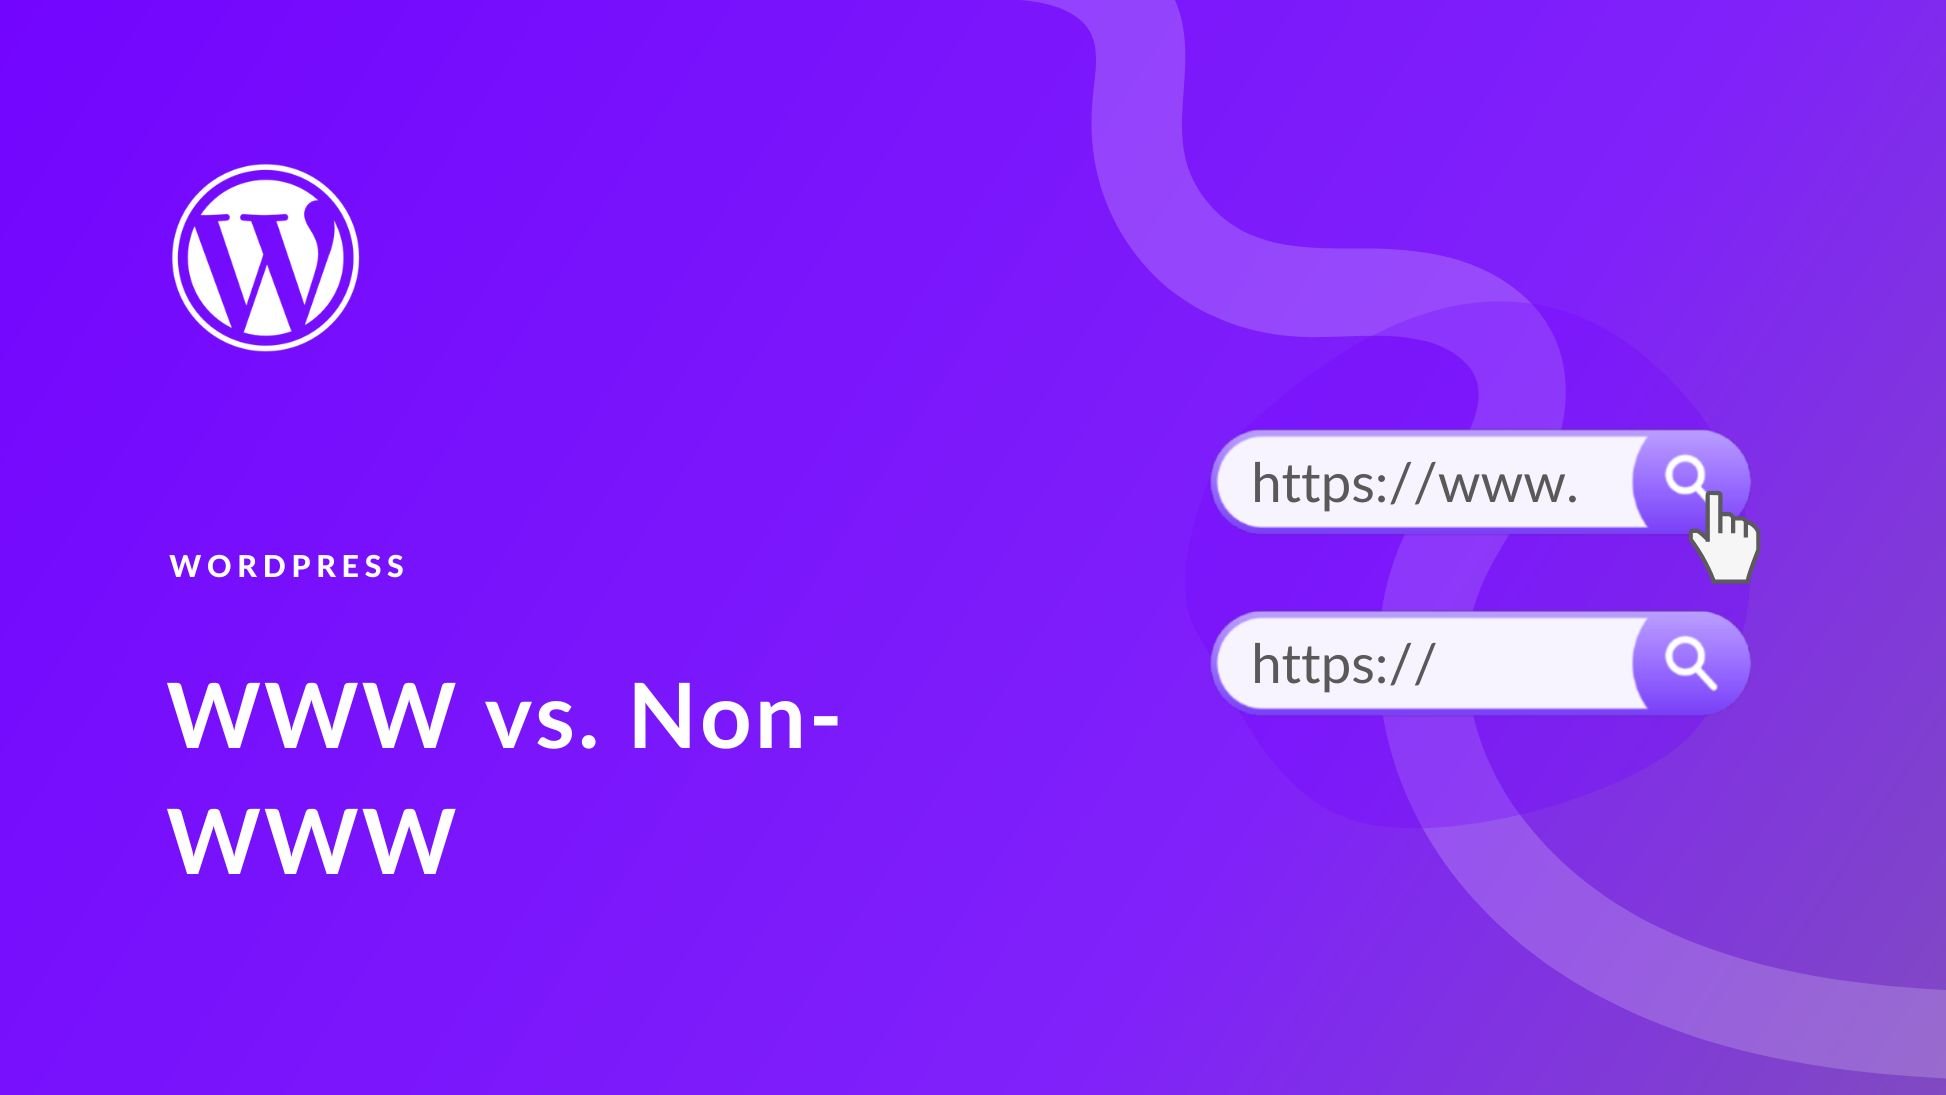 WWW vs non-WWW: Which is Better for SEO?